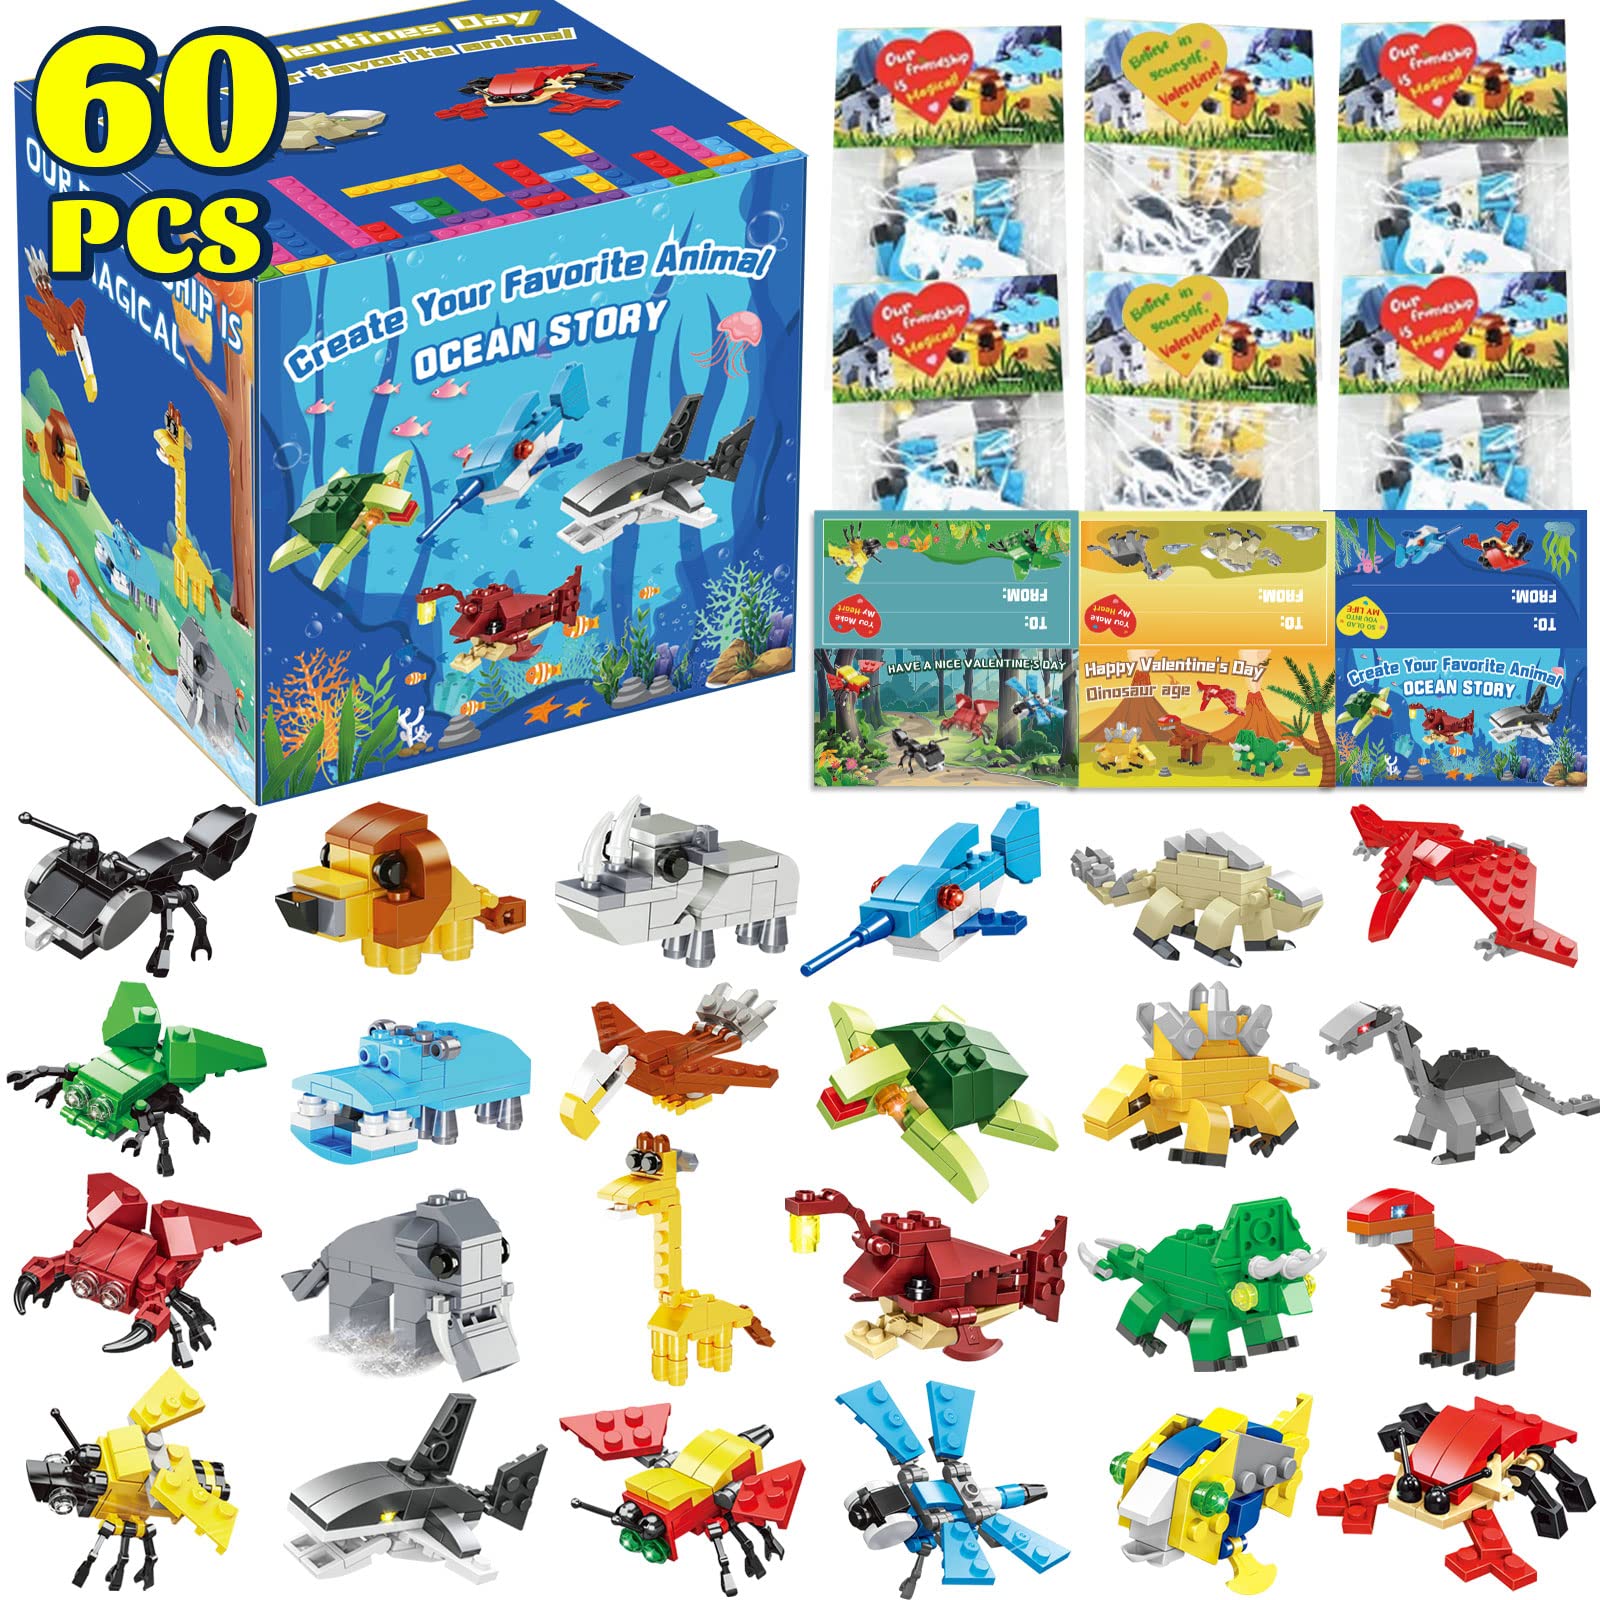 60 Pack Valentines Day Cards for Animal Building Blocks,Valentines Cards for Kids Classroom Party Favors Exchange Prize for Kids Valentine’s Greeting Cards with Animal Building Blocks